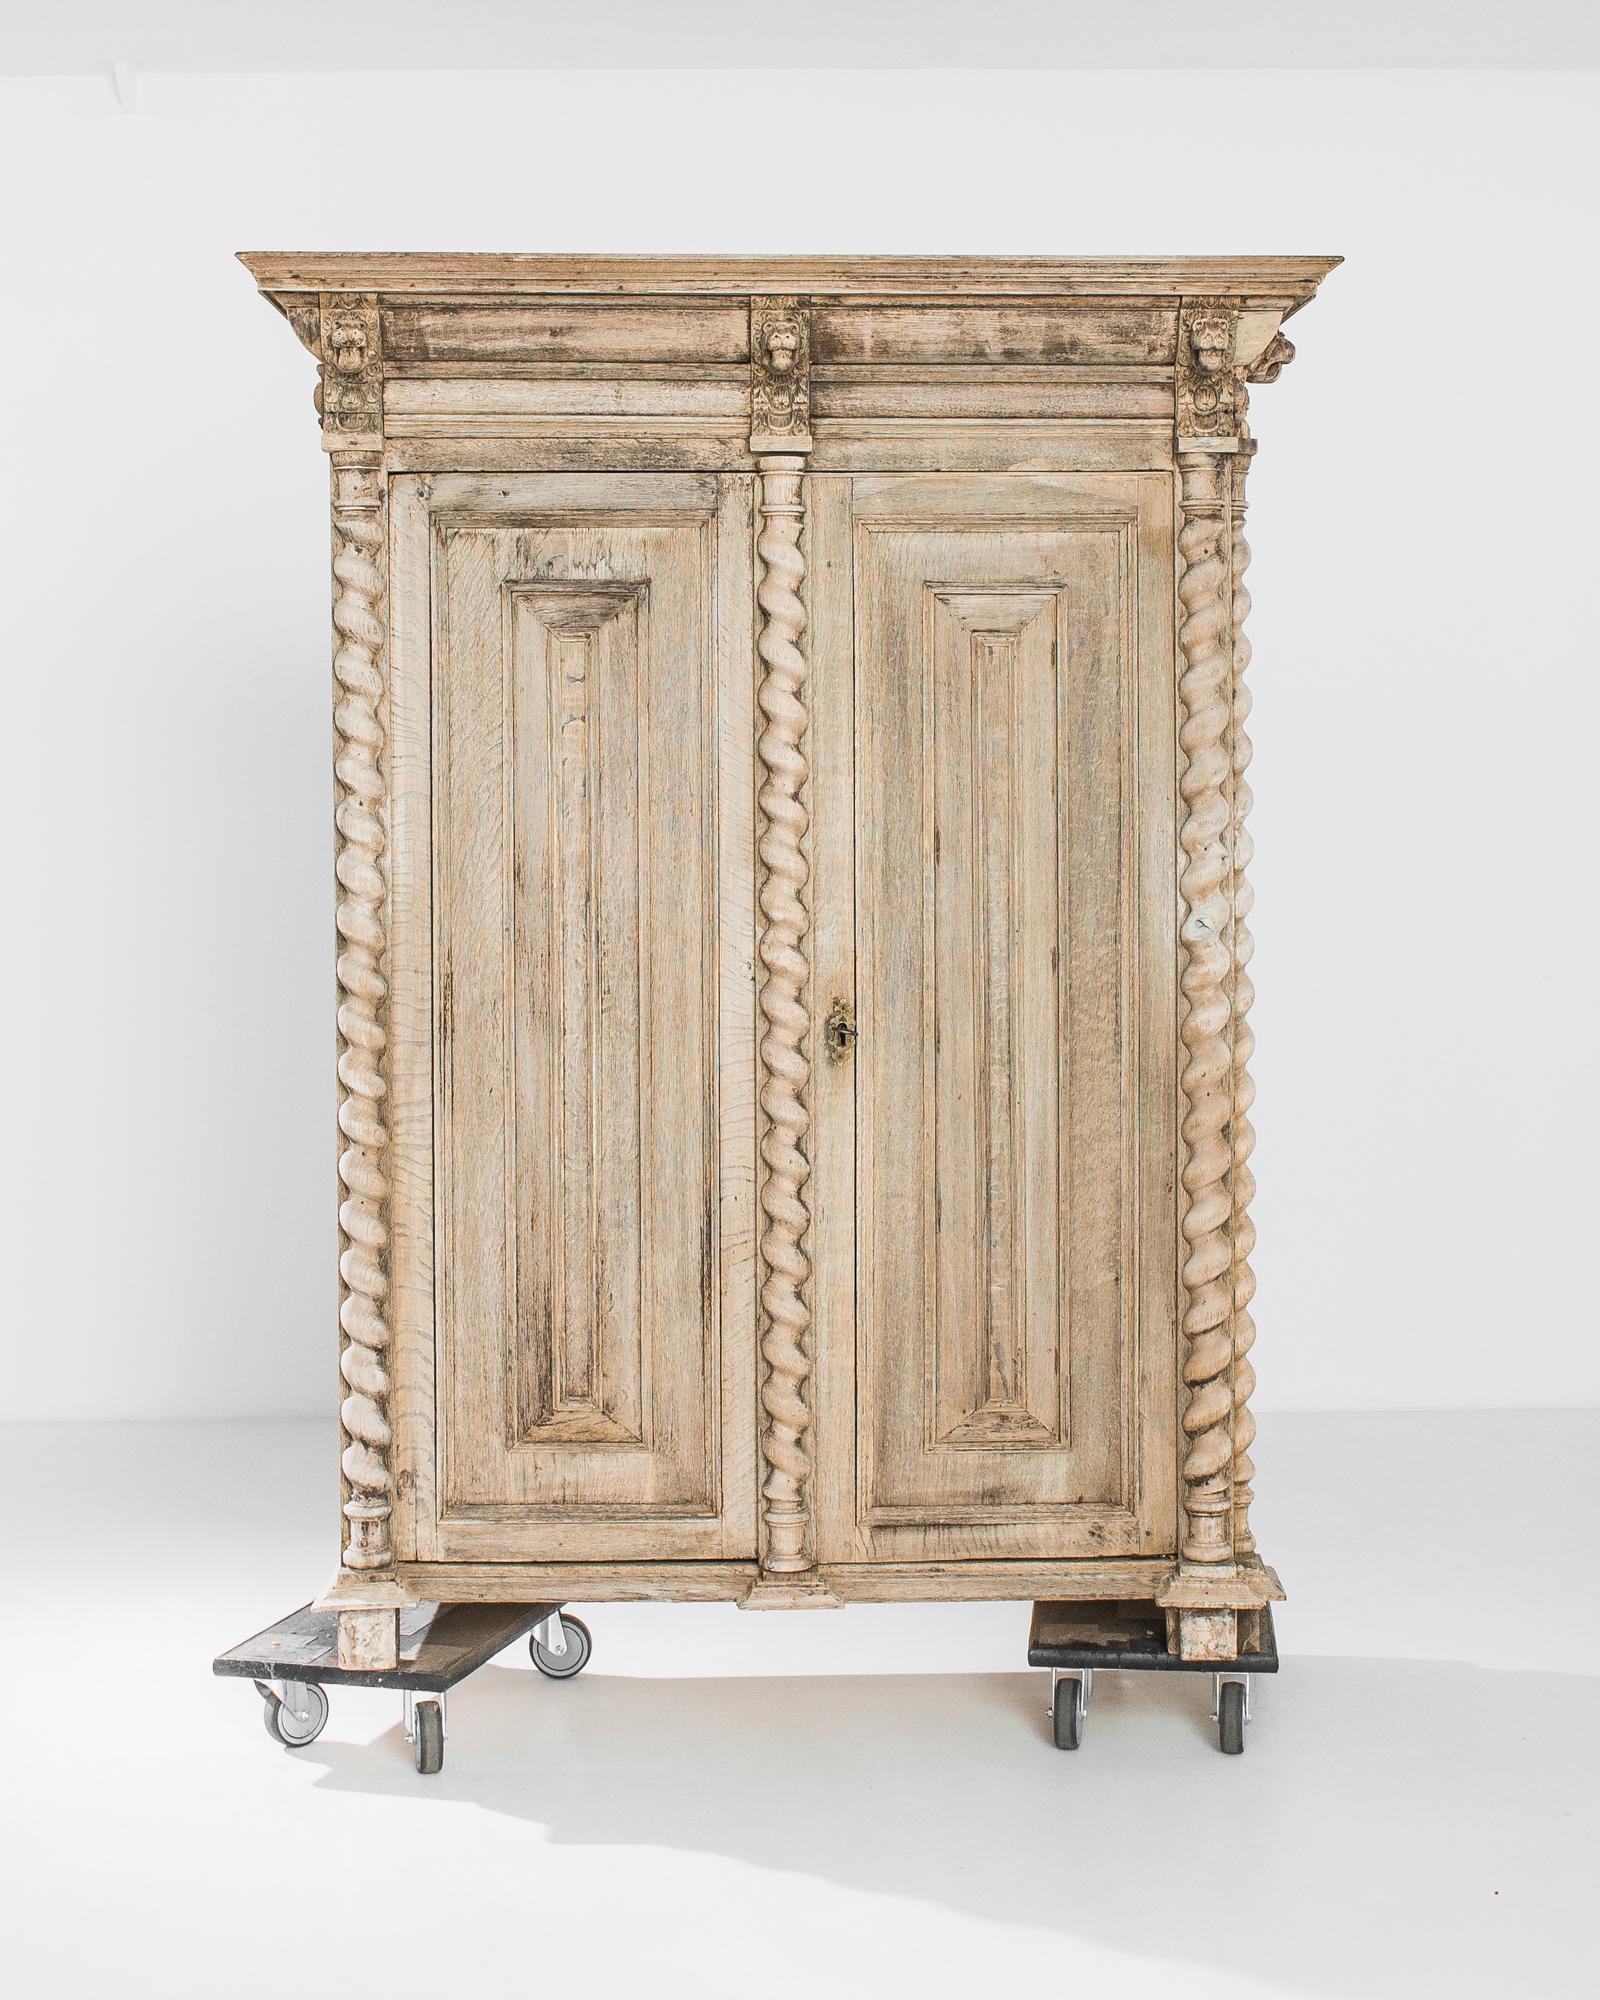 Like a centuries old antique column, this oak cabinet made in Belgium circa 1860 inspires a commanding presence. The exterior is solemnly adorned by lion mask carvings on the top and spiral pillars, which give an effect of a subtle flow. The